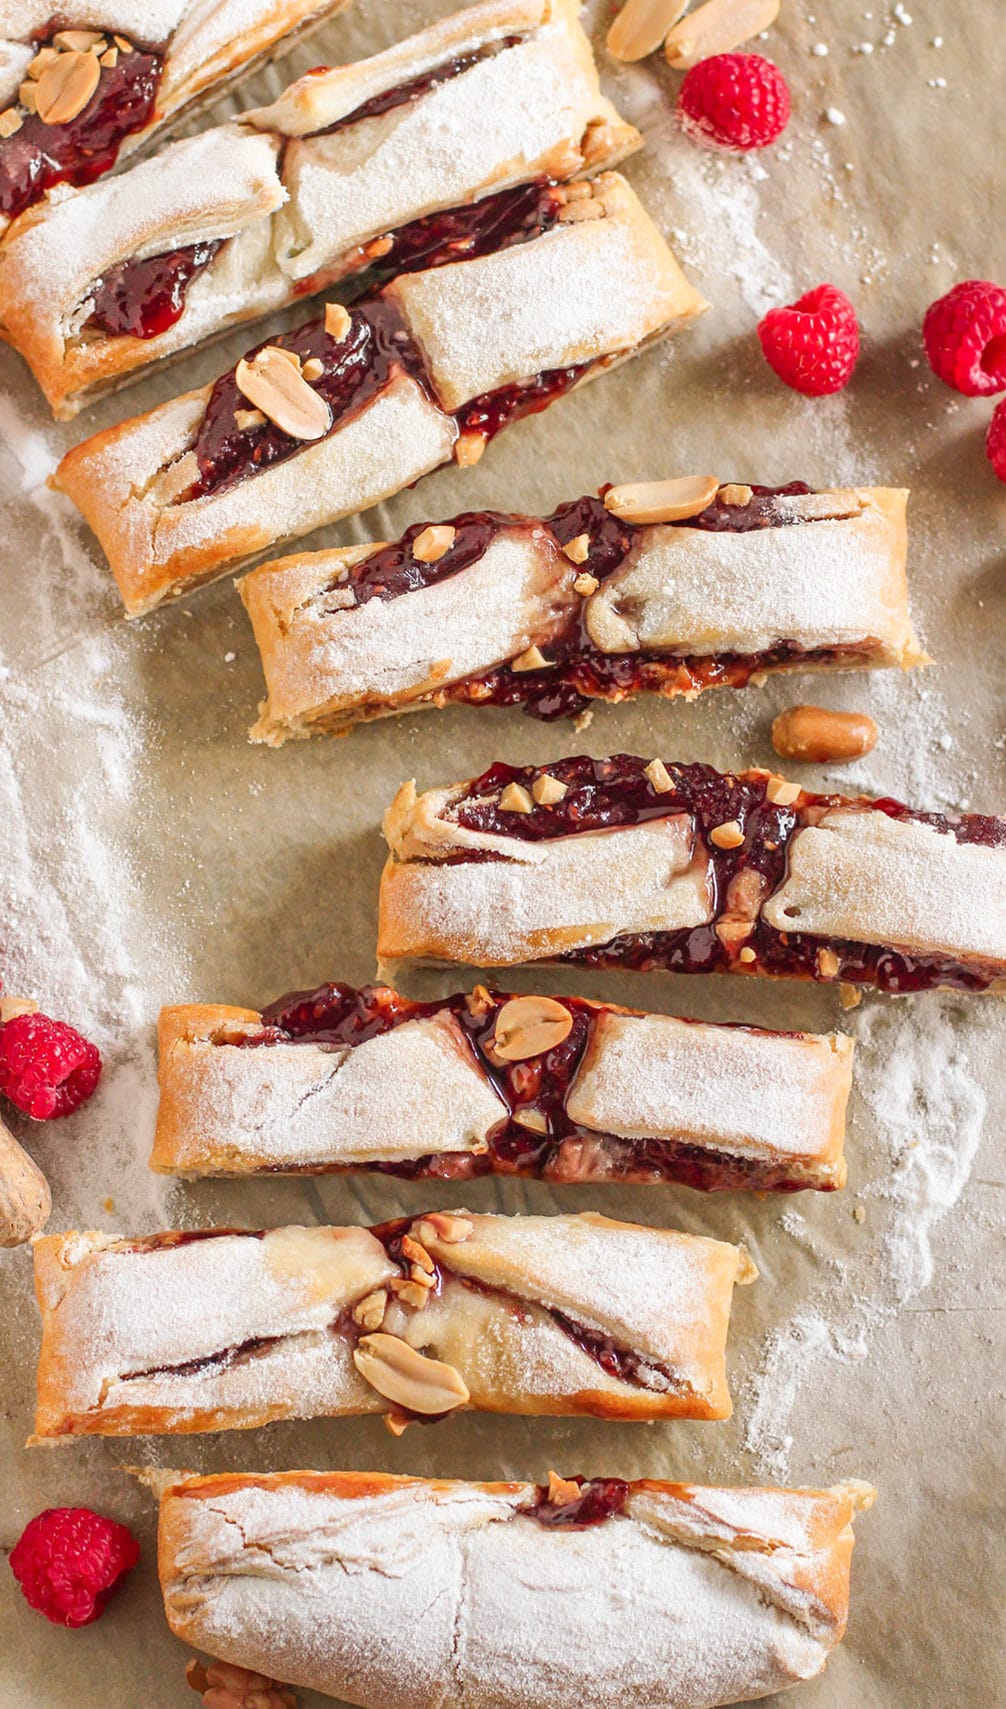 Step up your PB&J game with this easy Peanut Butter and Jelly Braid Bread! It looks difficult to make but took less than 20 minutes to whip together. Oh, and it’s vegan, all natural, and has no sugar added – perfect as a tasty, back to school lunchbox snack! Healthy Dessert Recipes with sugar free, low calorie, low fat, low carb, high protein, gluten free, dairy free, vegan, and raw options at the Desserts With Benefits Blog.